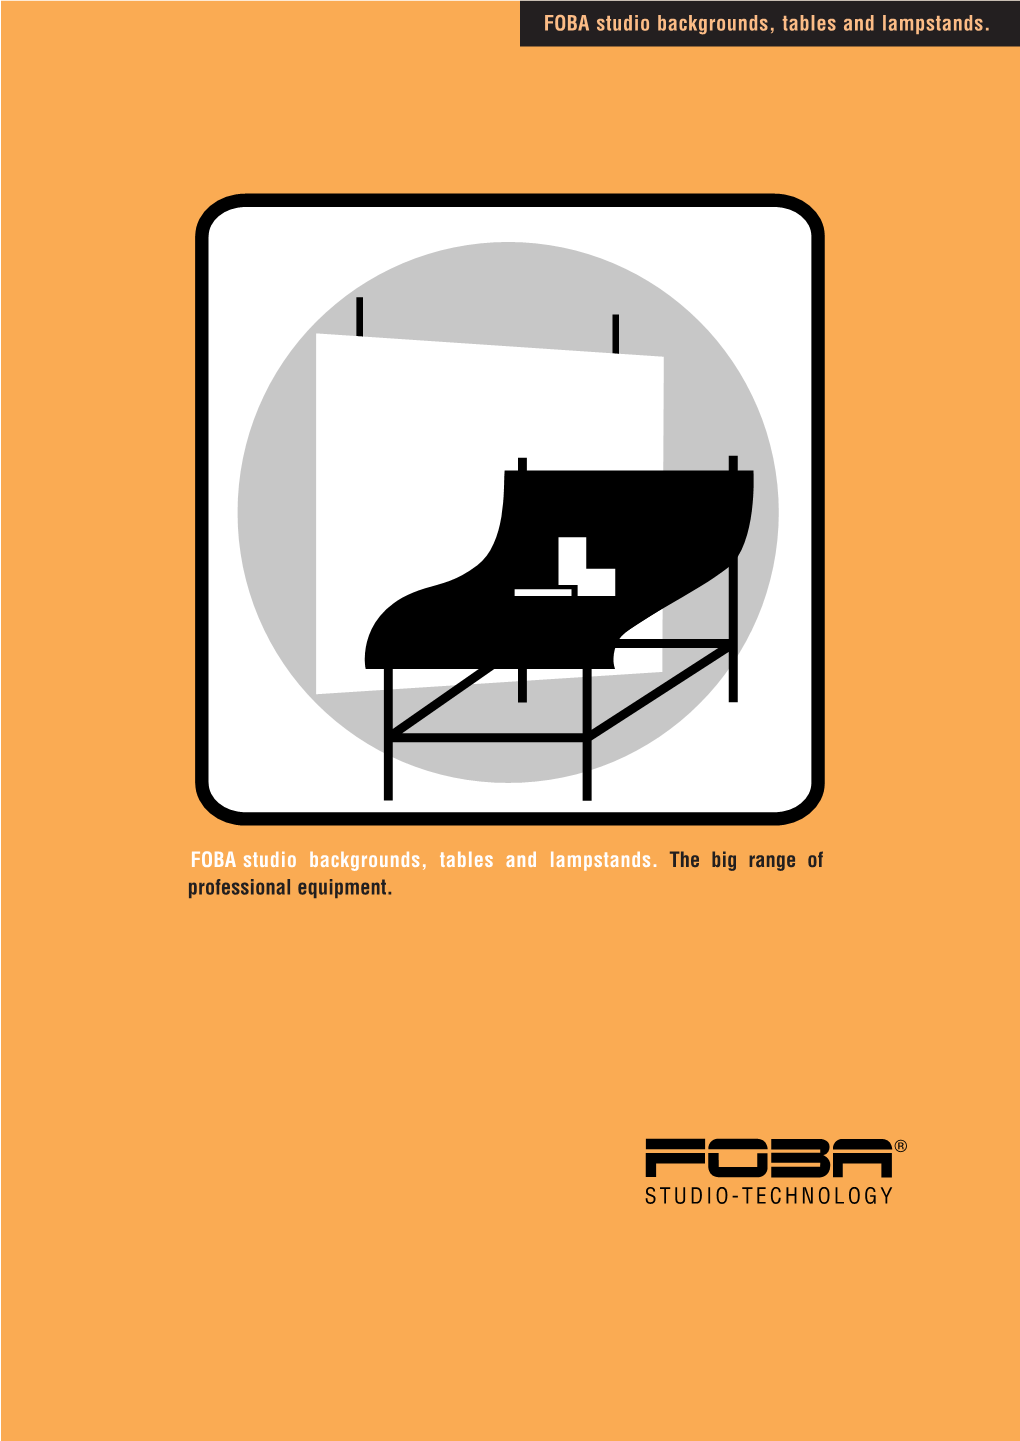 FOBA Studio Backgrounds, Tables and Lampstands. the Big Range of Professional Equipment